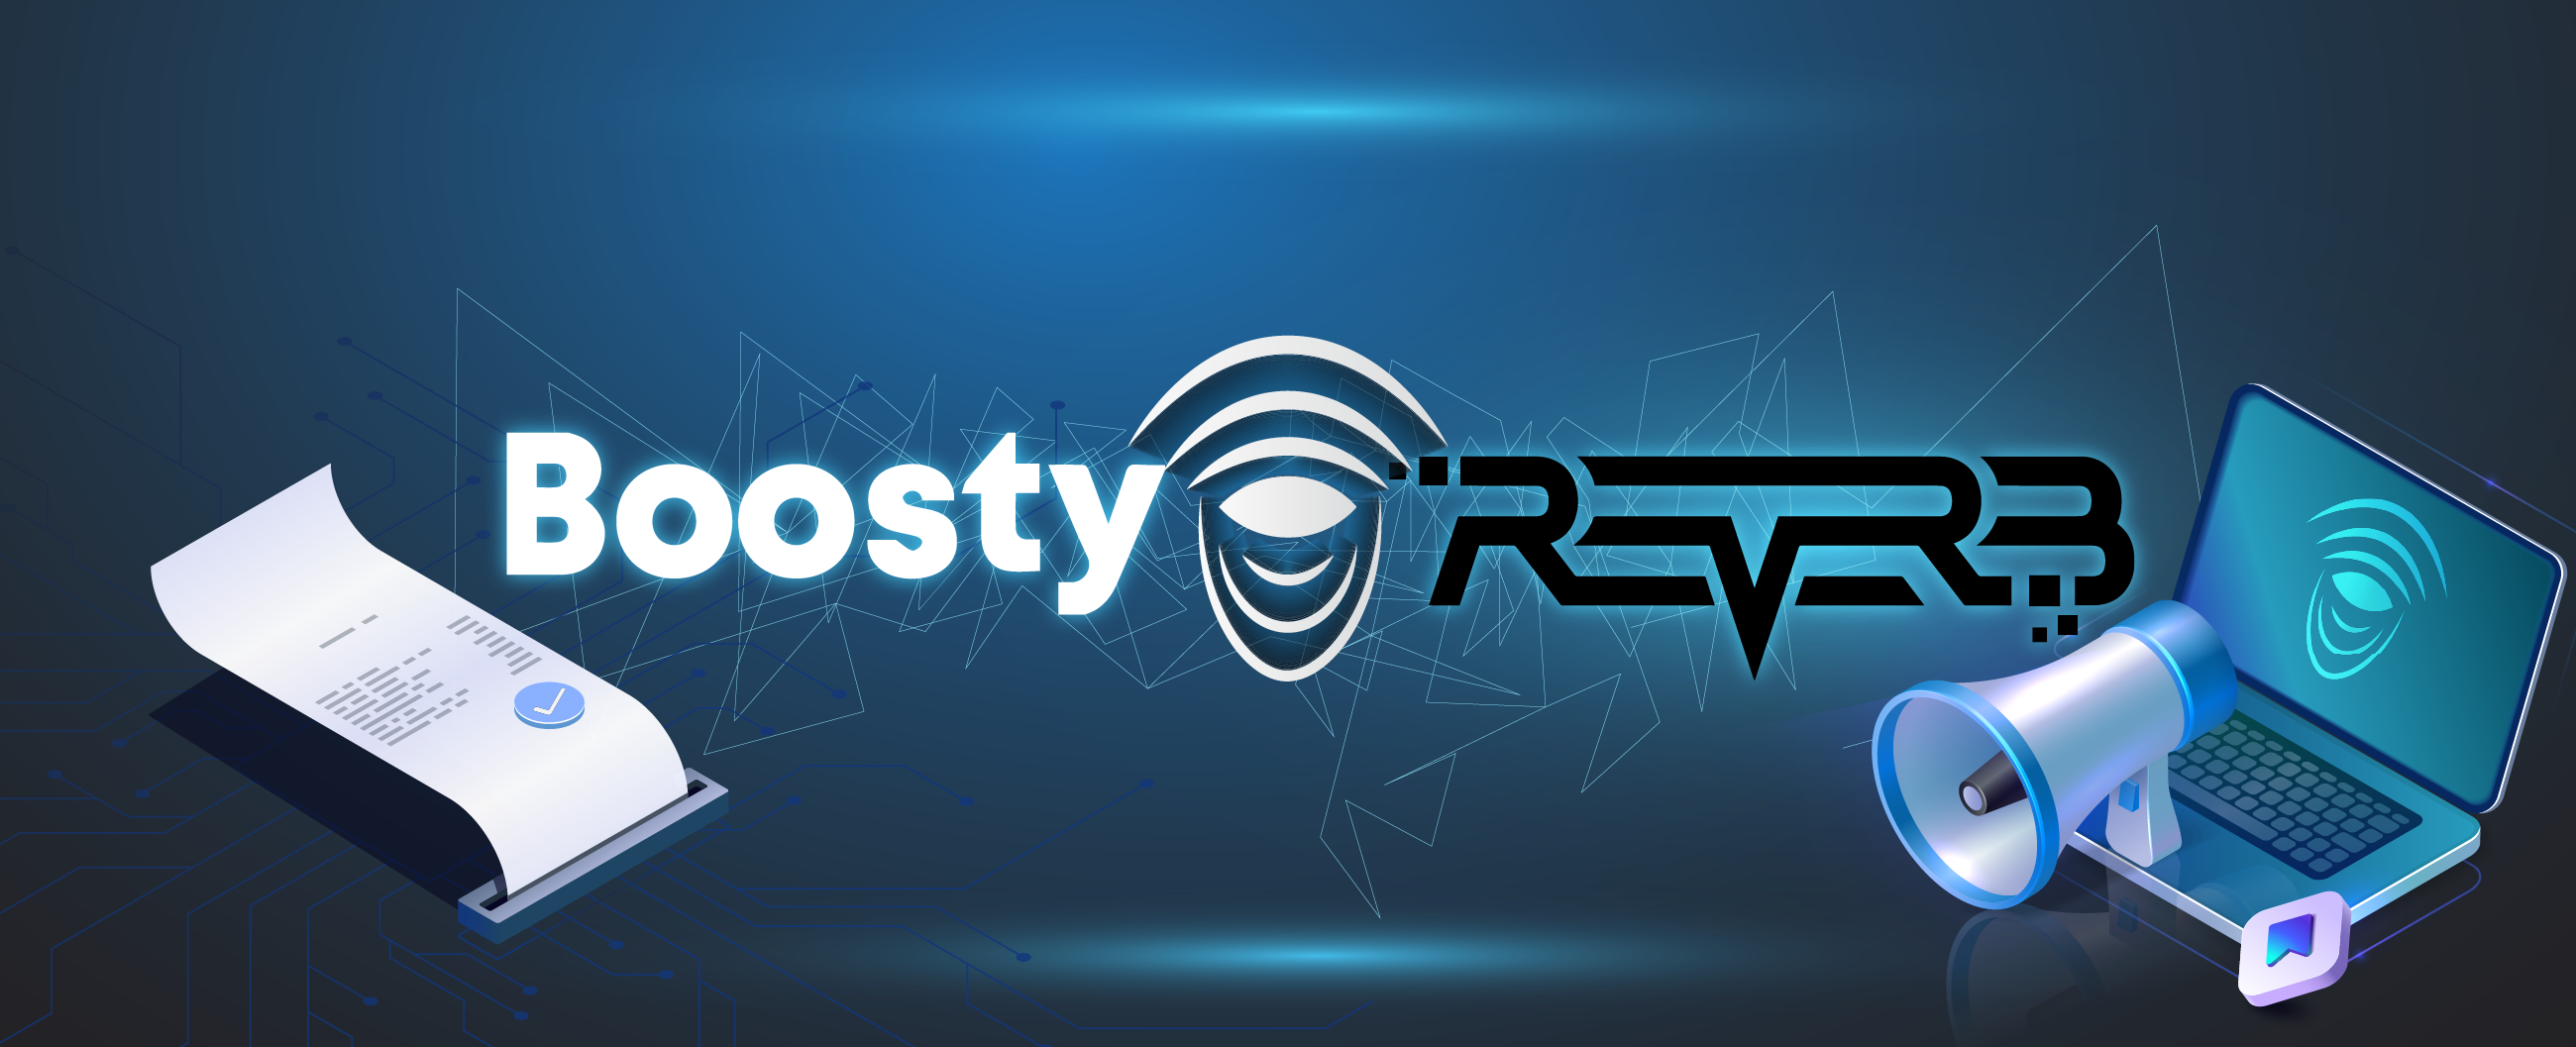 , Sastanaqqam Collaborates with Boosty Labs and Reverb to Create Revolutionary Blockchain-based Ecosystem